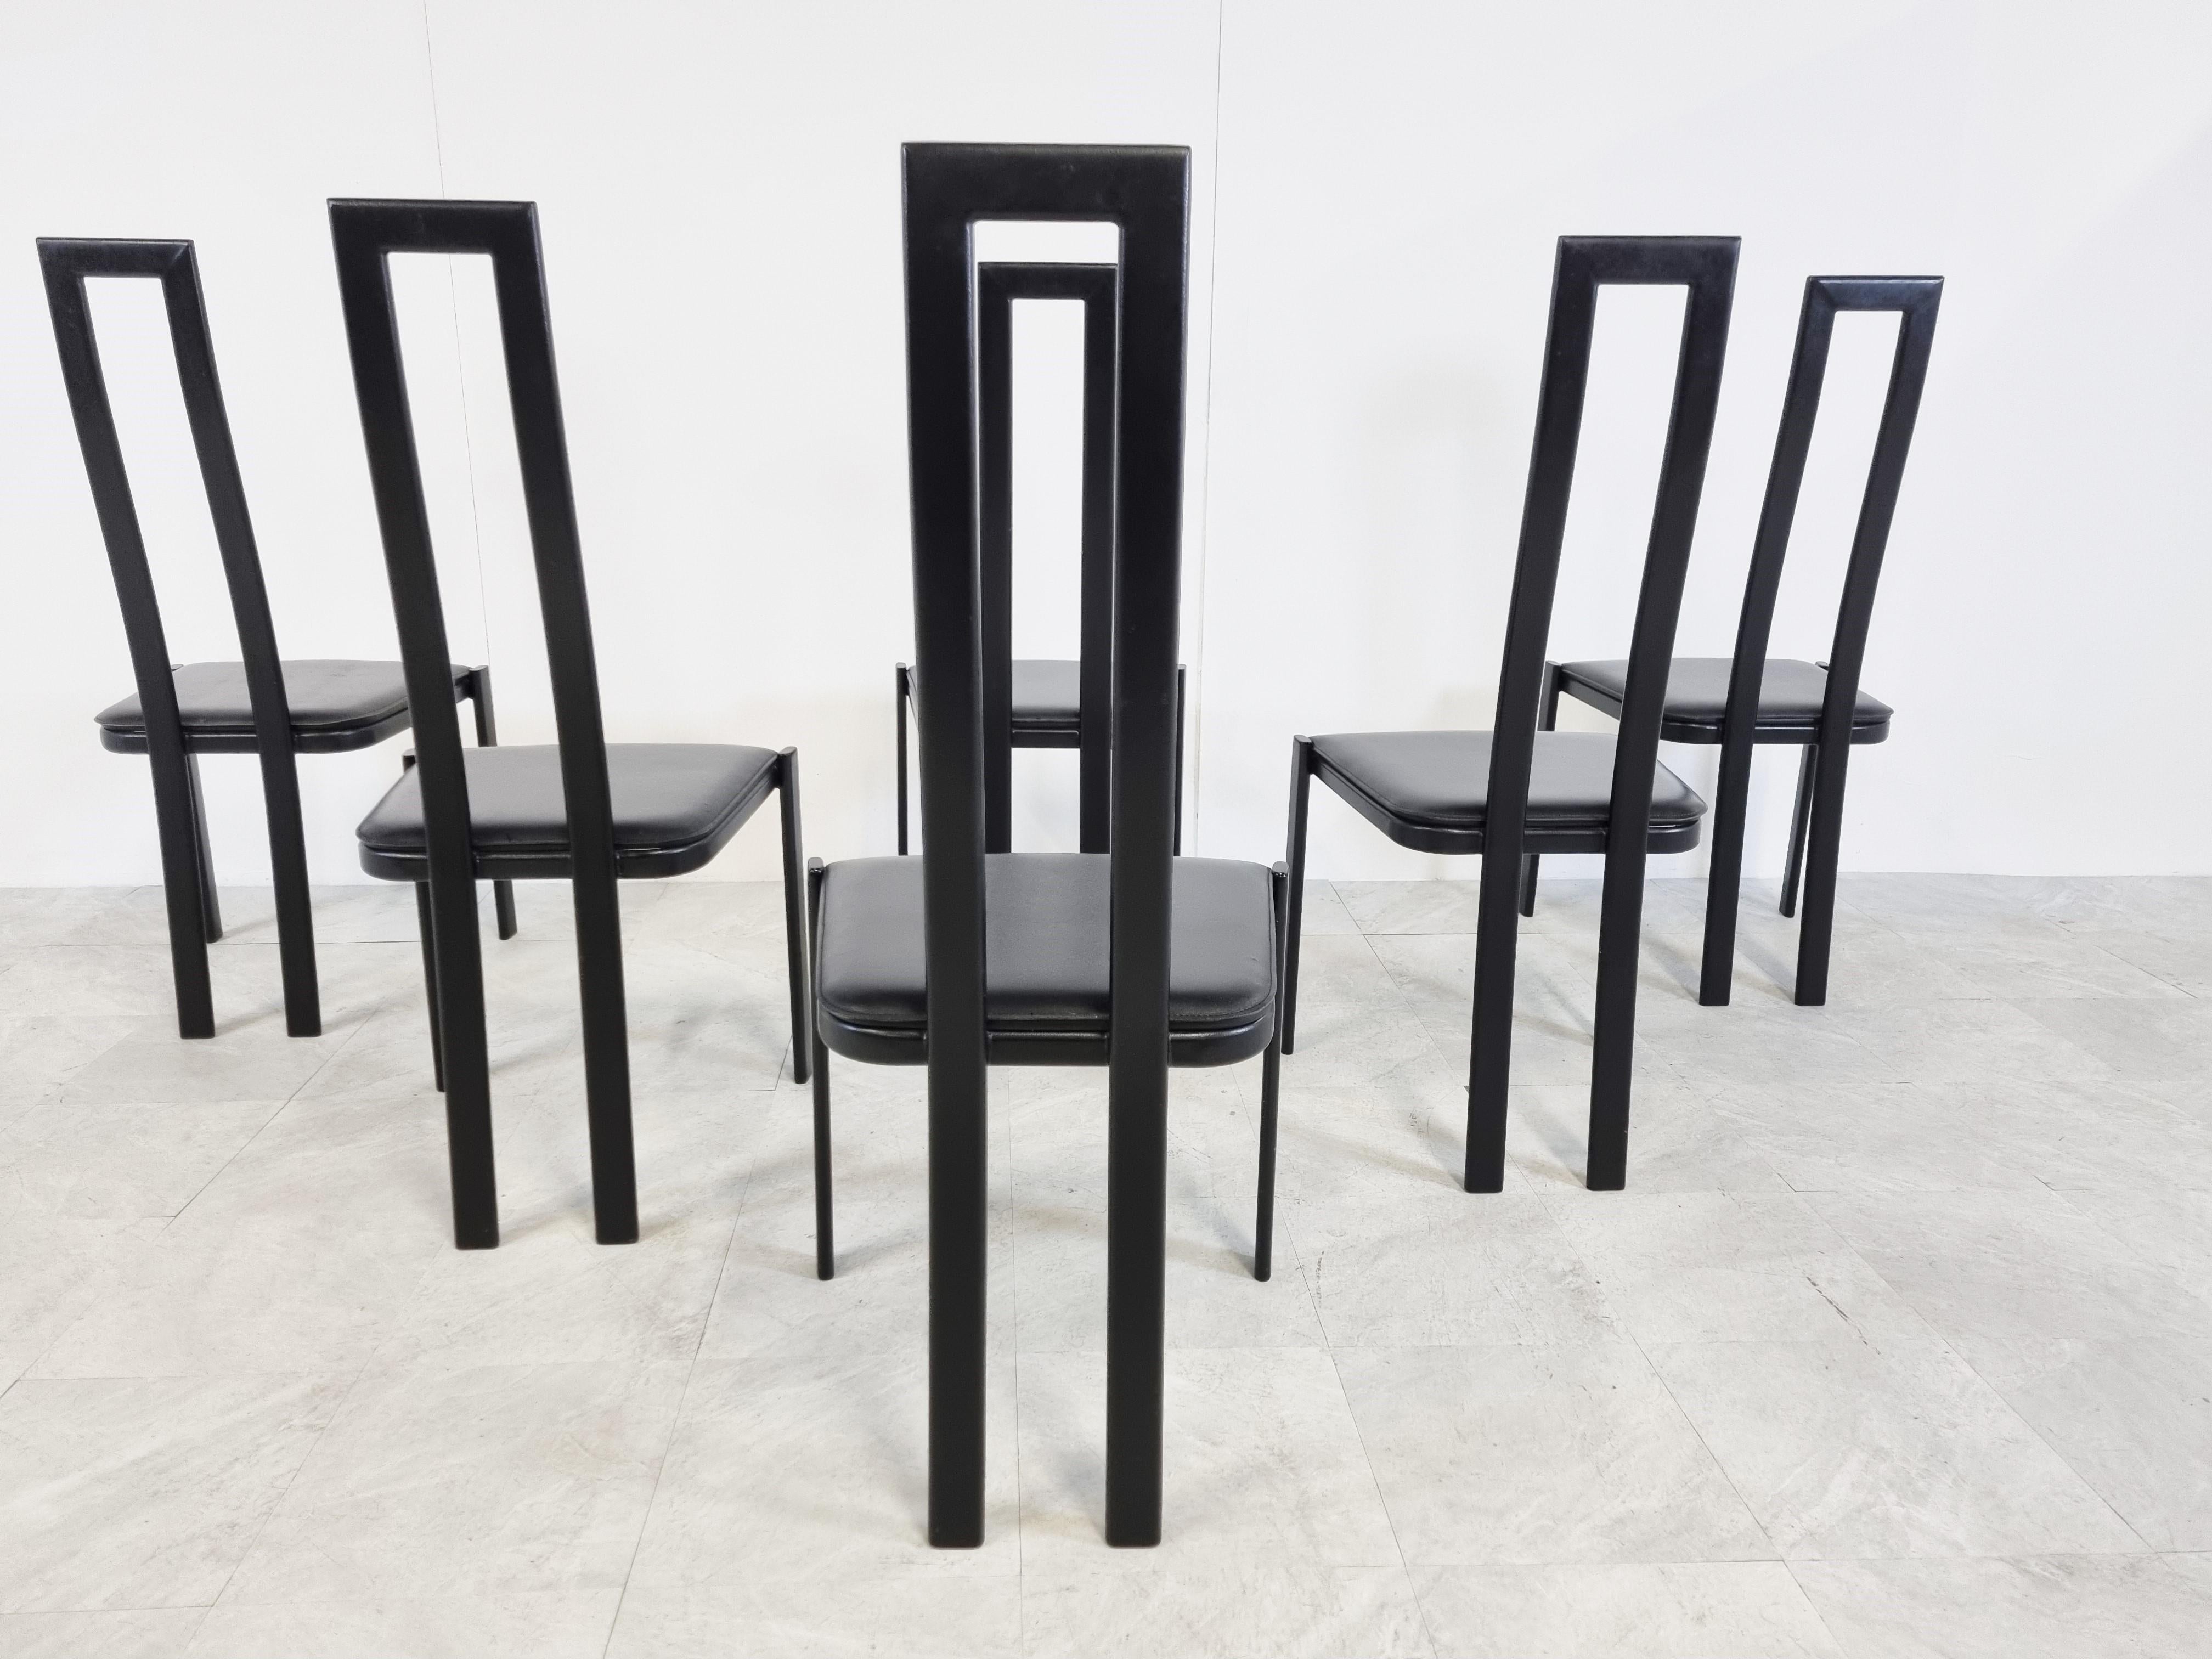 Italian metal postmodern dining chairs with black metal frames and black leather seats.

Good condition.

In the style of Cattelan Italy

1980s - Italy

Dimensions:
Height: 104cm/40.94